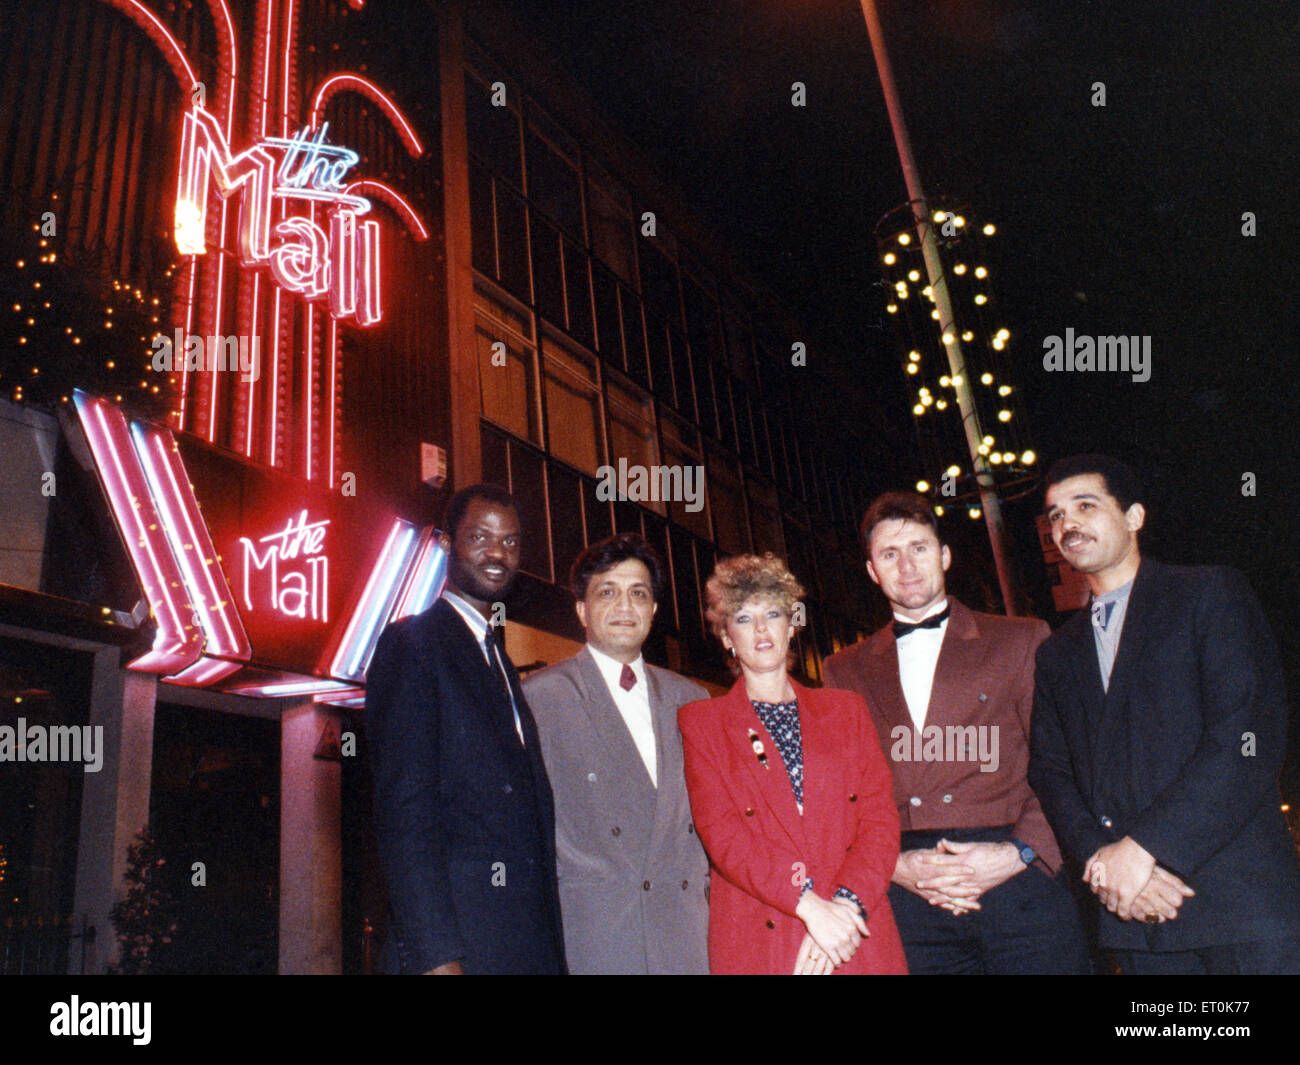 Staff at The Mall nightclub in Stockton, including Jimmy Dean (2nd left). 20th December 1992. Stock Photo